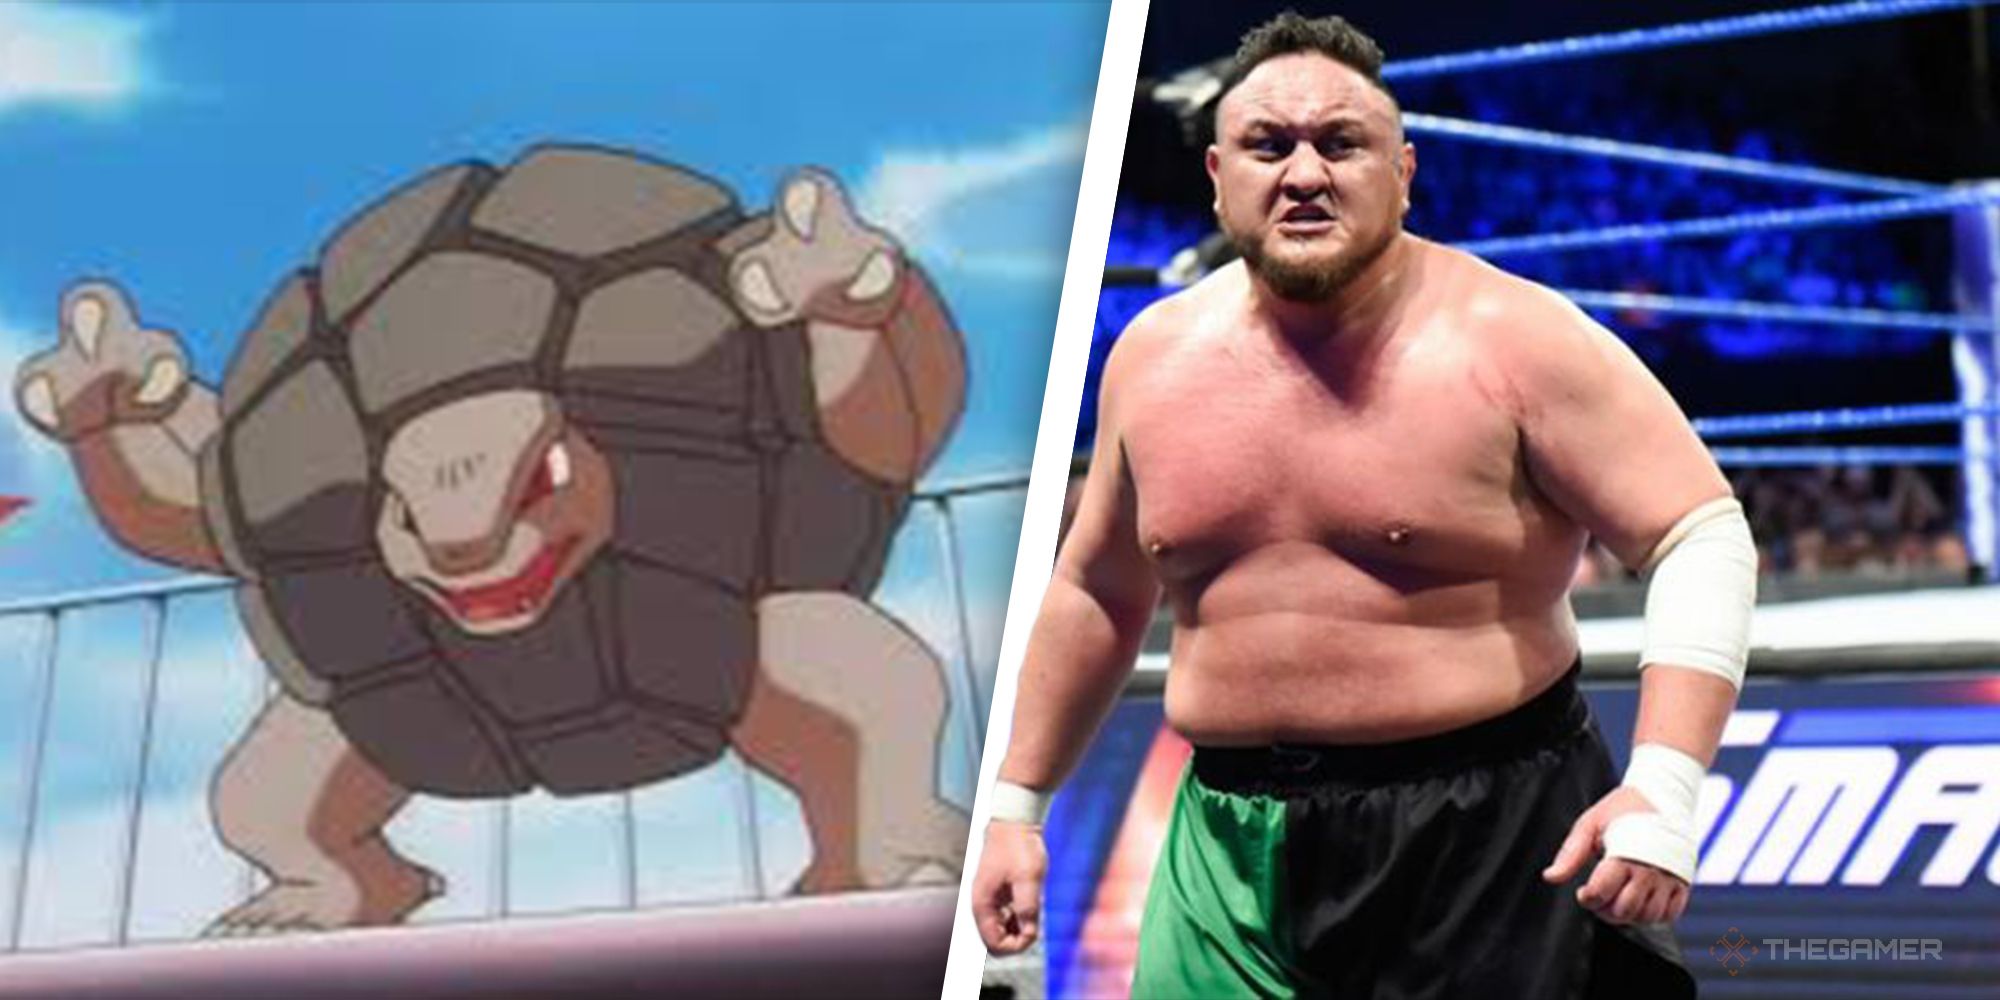 Heres 30 Wrestlers As Pokemon For The Royal Rumble (23)